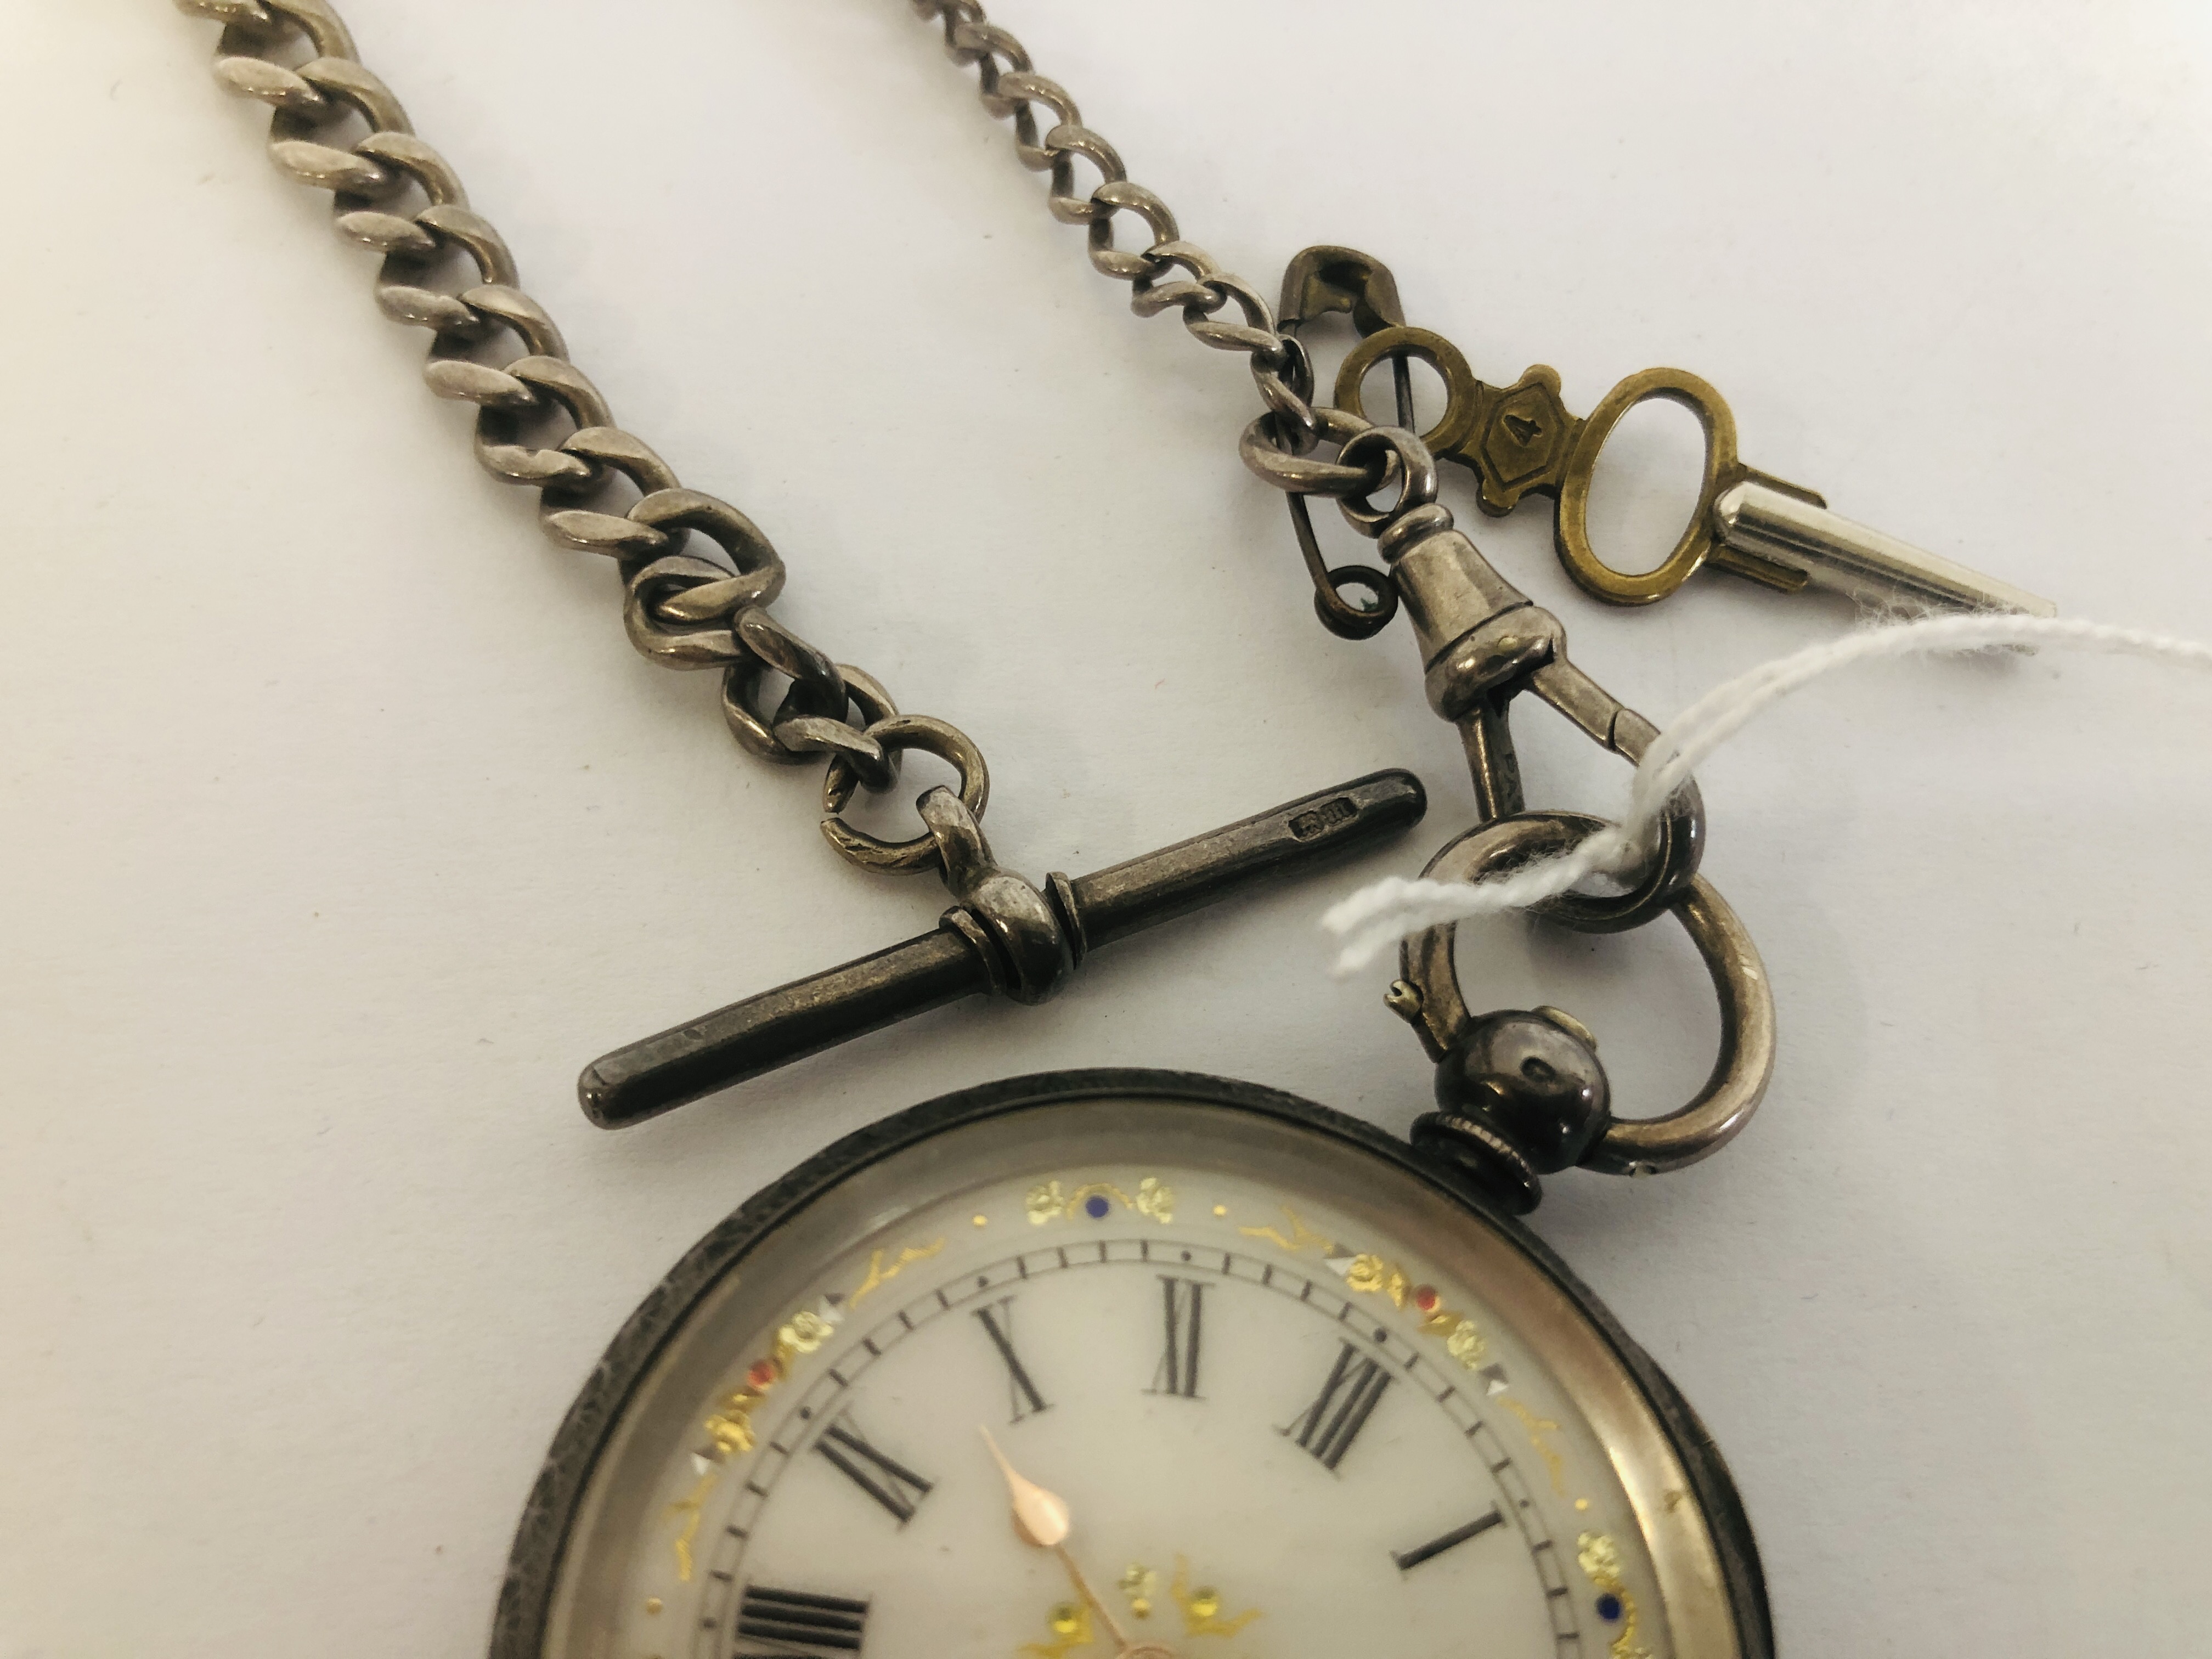 AN ORNATE SILVER POCKET WATCH WITH DECORATIVE ENAMELLED FACE ON SILVER T-BAR CHAIN - Image 5 of 6